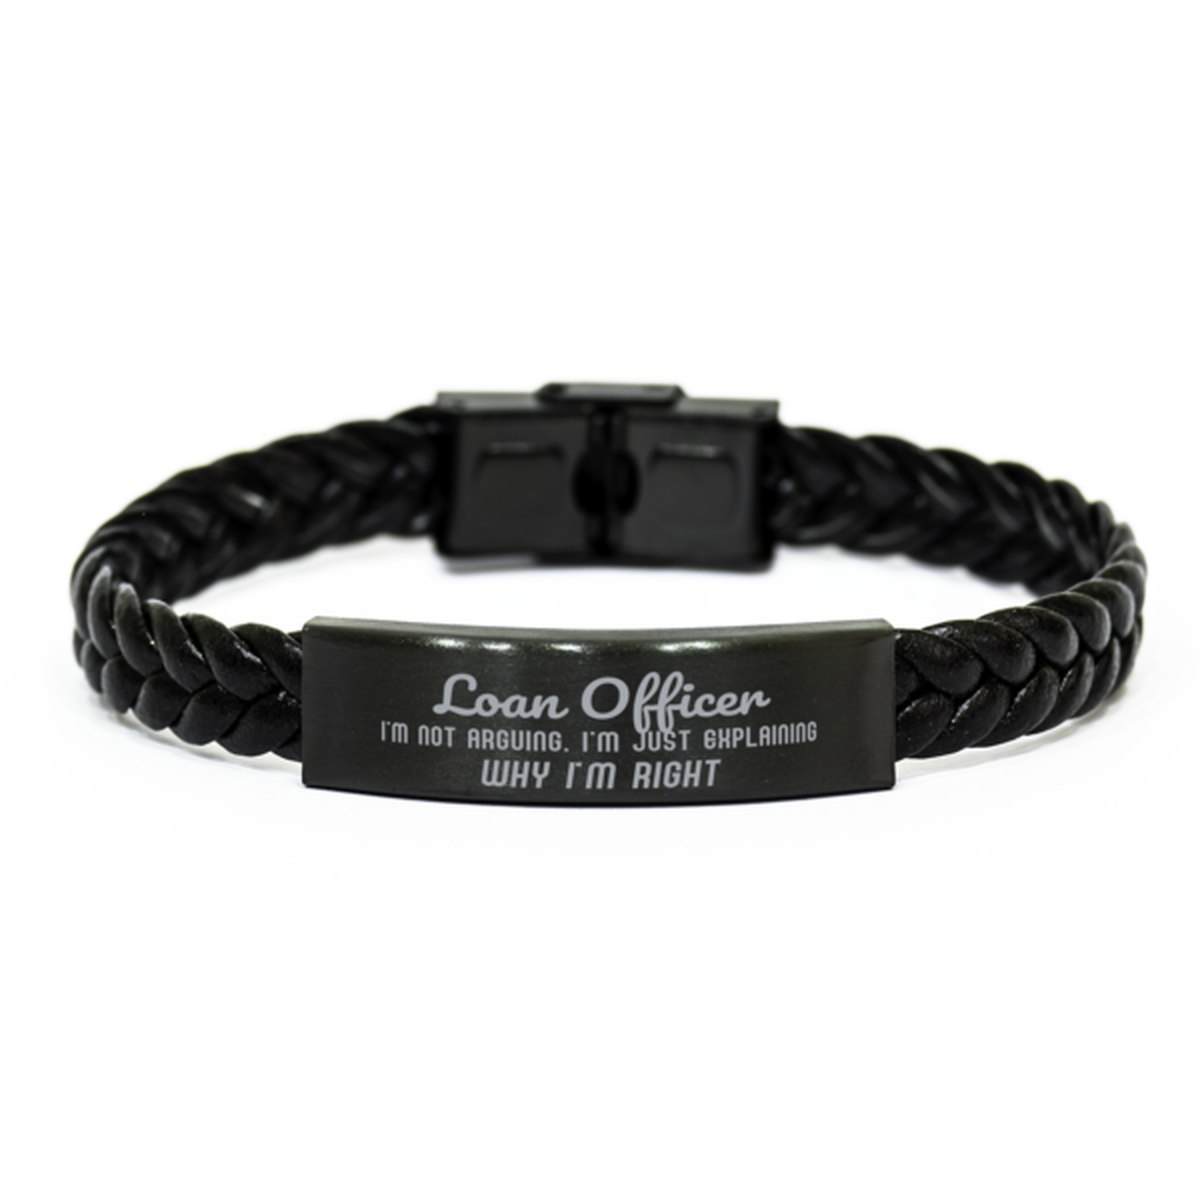 Loan Officer I'm not Arguing. I'm Just Explaining Why I'm RIGHT Braided Leather Bracelet, Graduation Birthday Christmas Loan Officer Gifts For Loan Officer Funny Saying Quote Present for Men Women Coworker